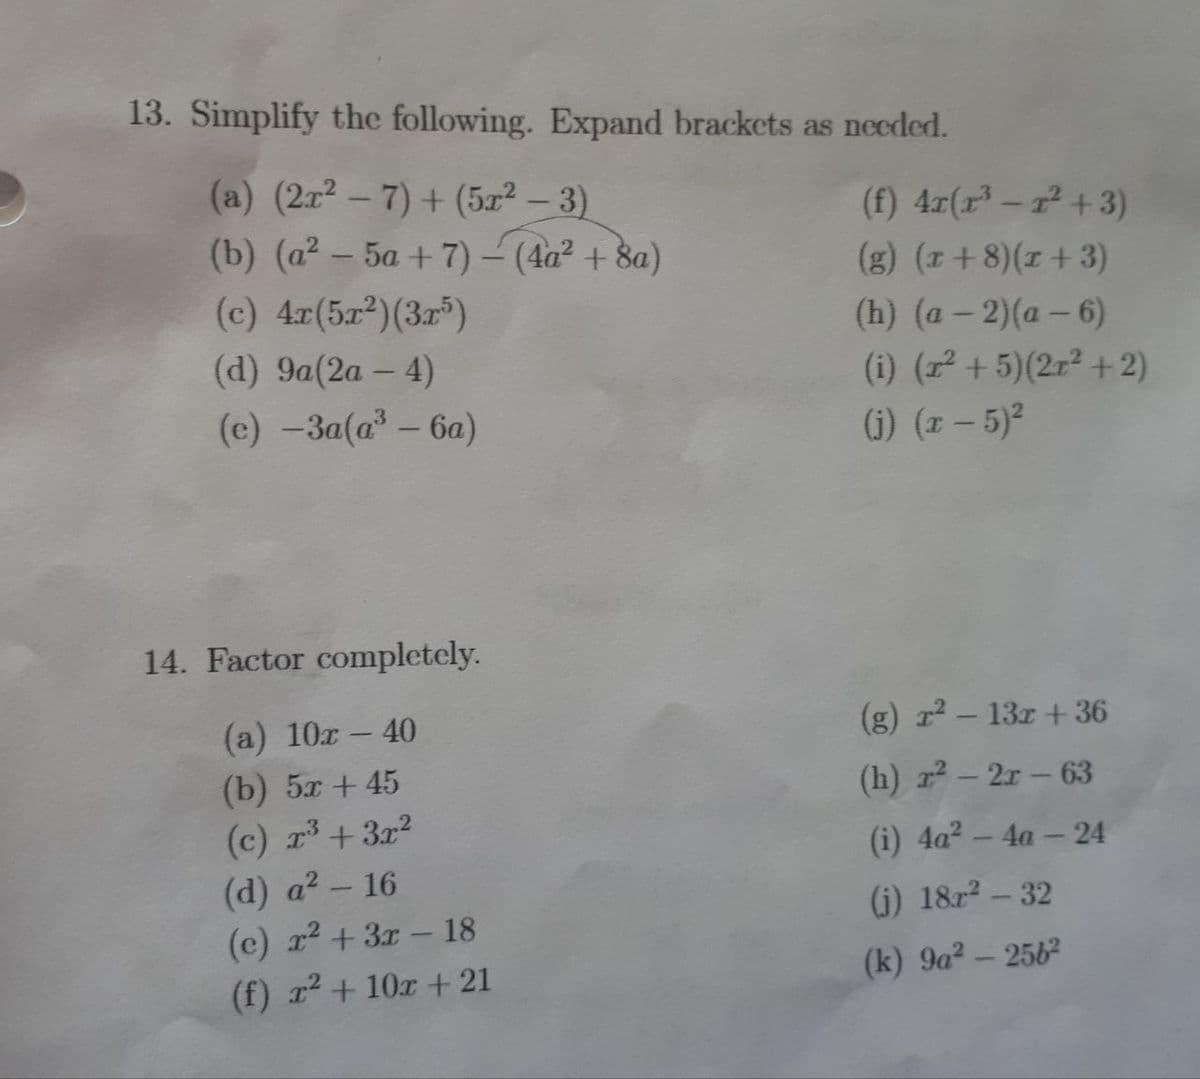 (a) (2x2-7)+(5x2-3)
13. Simplify the following. Expand brackets as needed.
(f) 4x(x³-r²+3)
(b) (a2-5a+7) - (4a² + 8a)
(g) (x+8)(x+3)
(c) 4x(5x2) (3x5)
(h) (a-2)(a-6)
(d) 9a(2a - 4)
(e) -3a(a³ - 6a)
(i) (x² + 5)(2x²+2)
(j) (x-5)²
(a) 10x - 40
14. Factor completely.
(g) r² - 13x+36
(b) 5x +45
(h) r²-2r-63
(c) x3 + 3x²
(d) a² - 16
(i) 4a² - 4a - 24
(e) x²+3x-18
(j) 18x² - 32
(f) x²+10x + 21
(k) 9a² - 2562